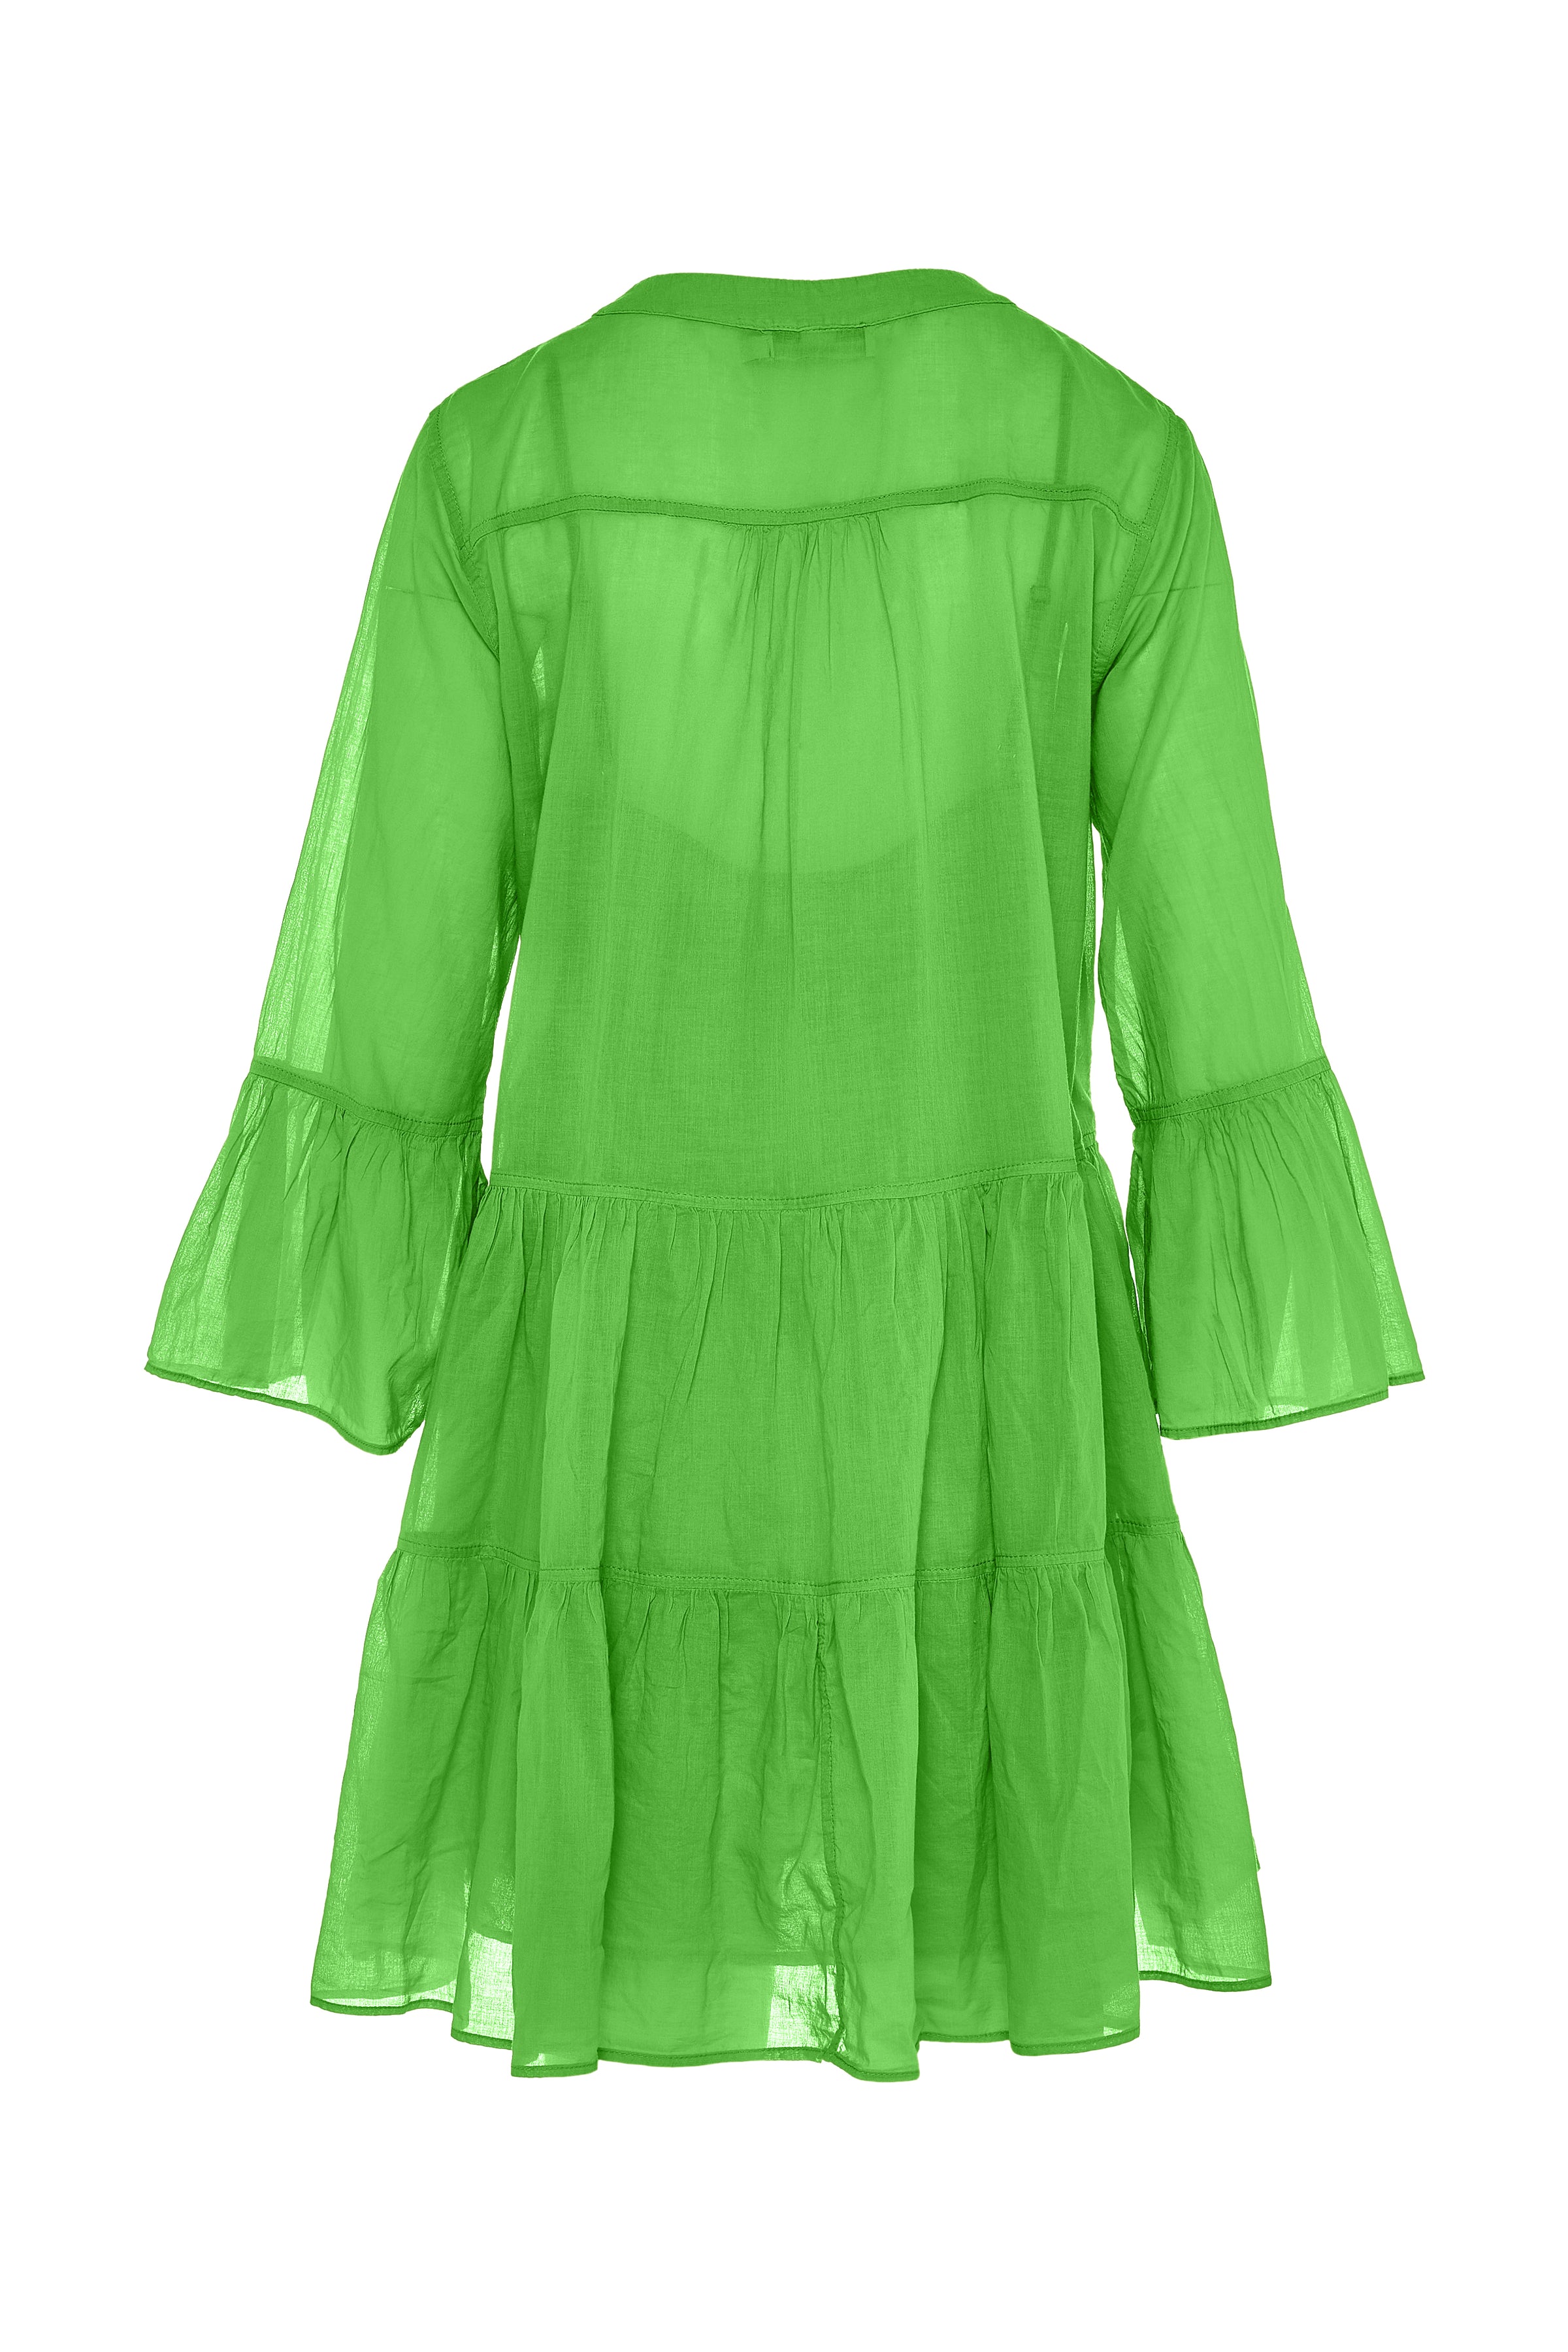 Green knee length lightweight beach dress with long fluted sleeves and tiered skirt with notch neckline